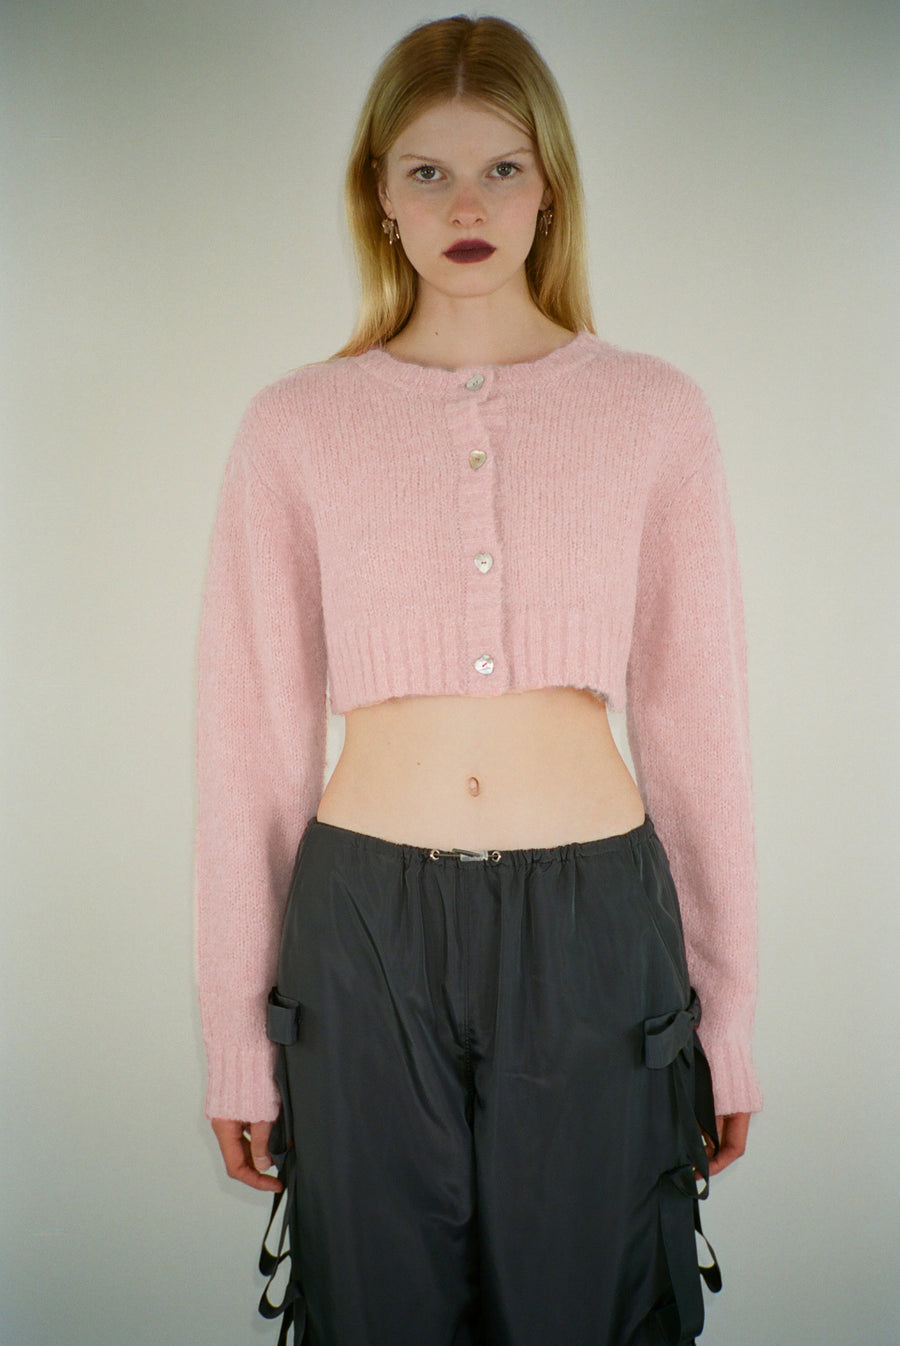 Cropped knit cardigan in blush pink with buttons on model